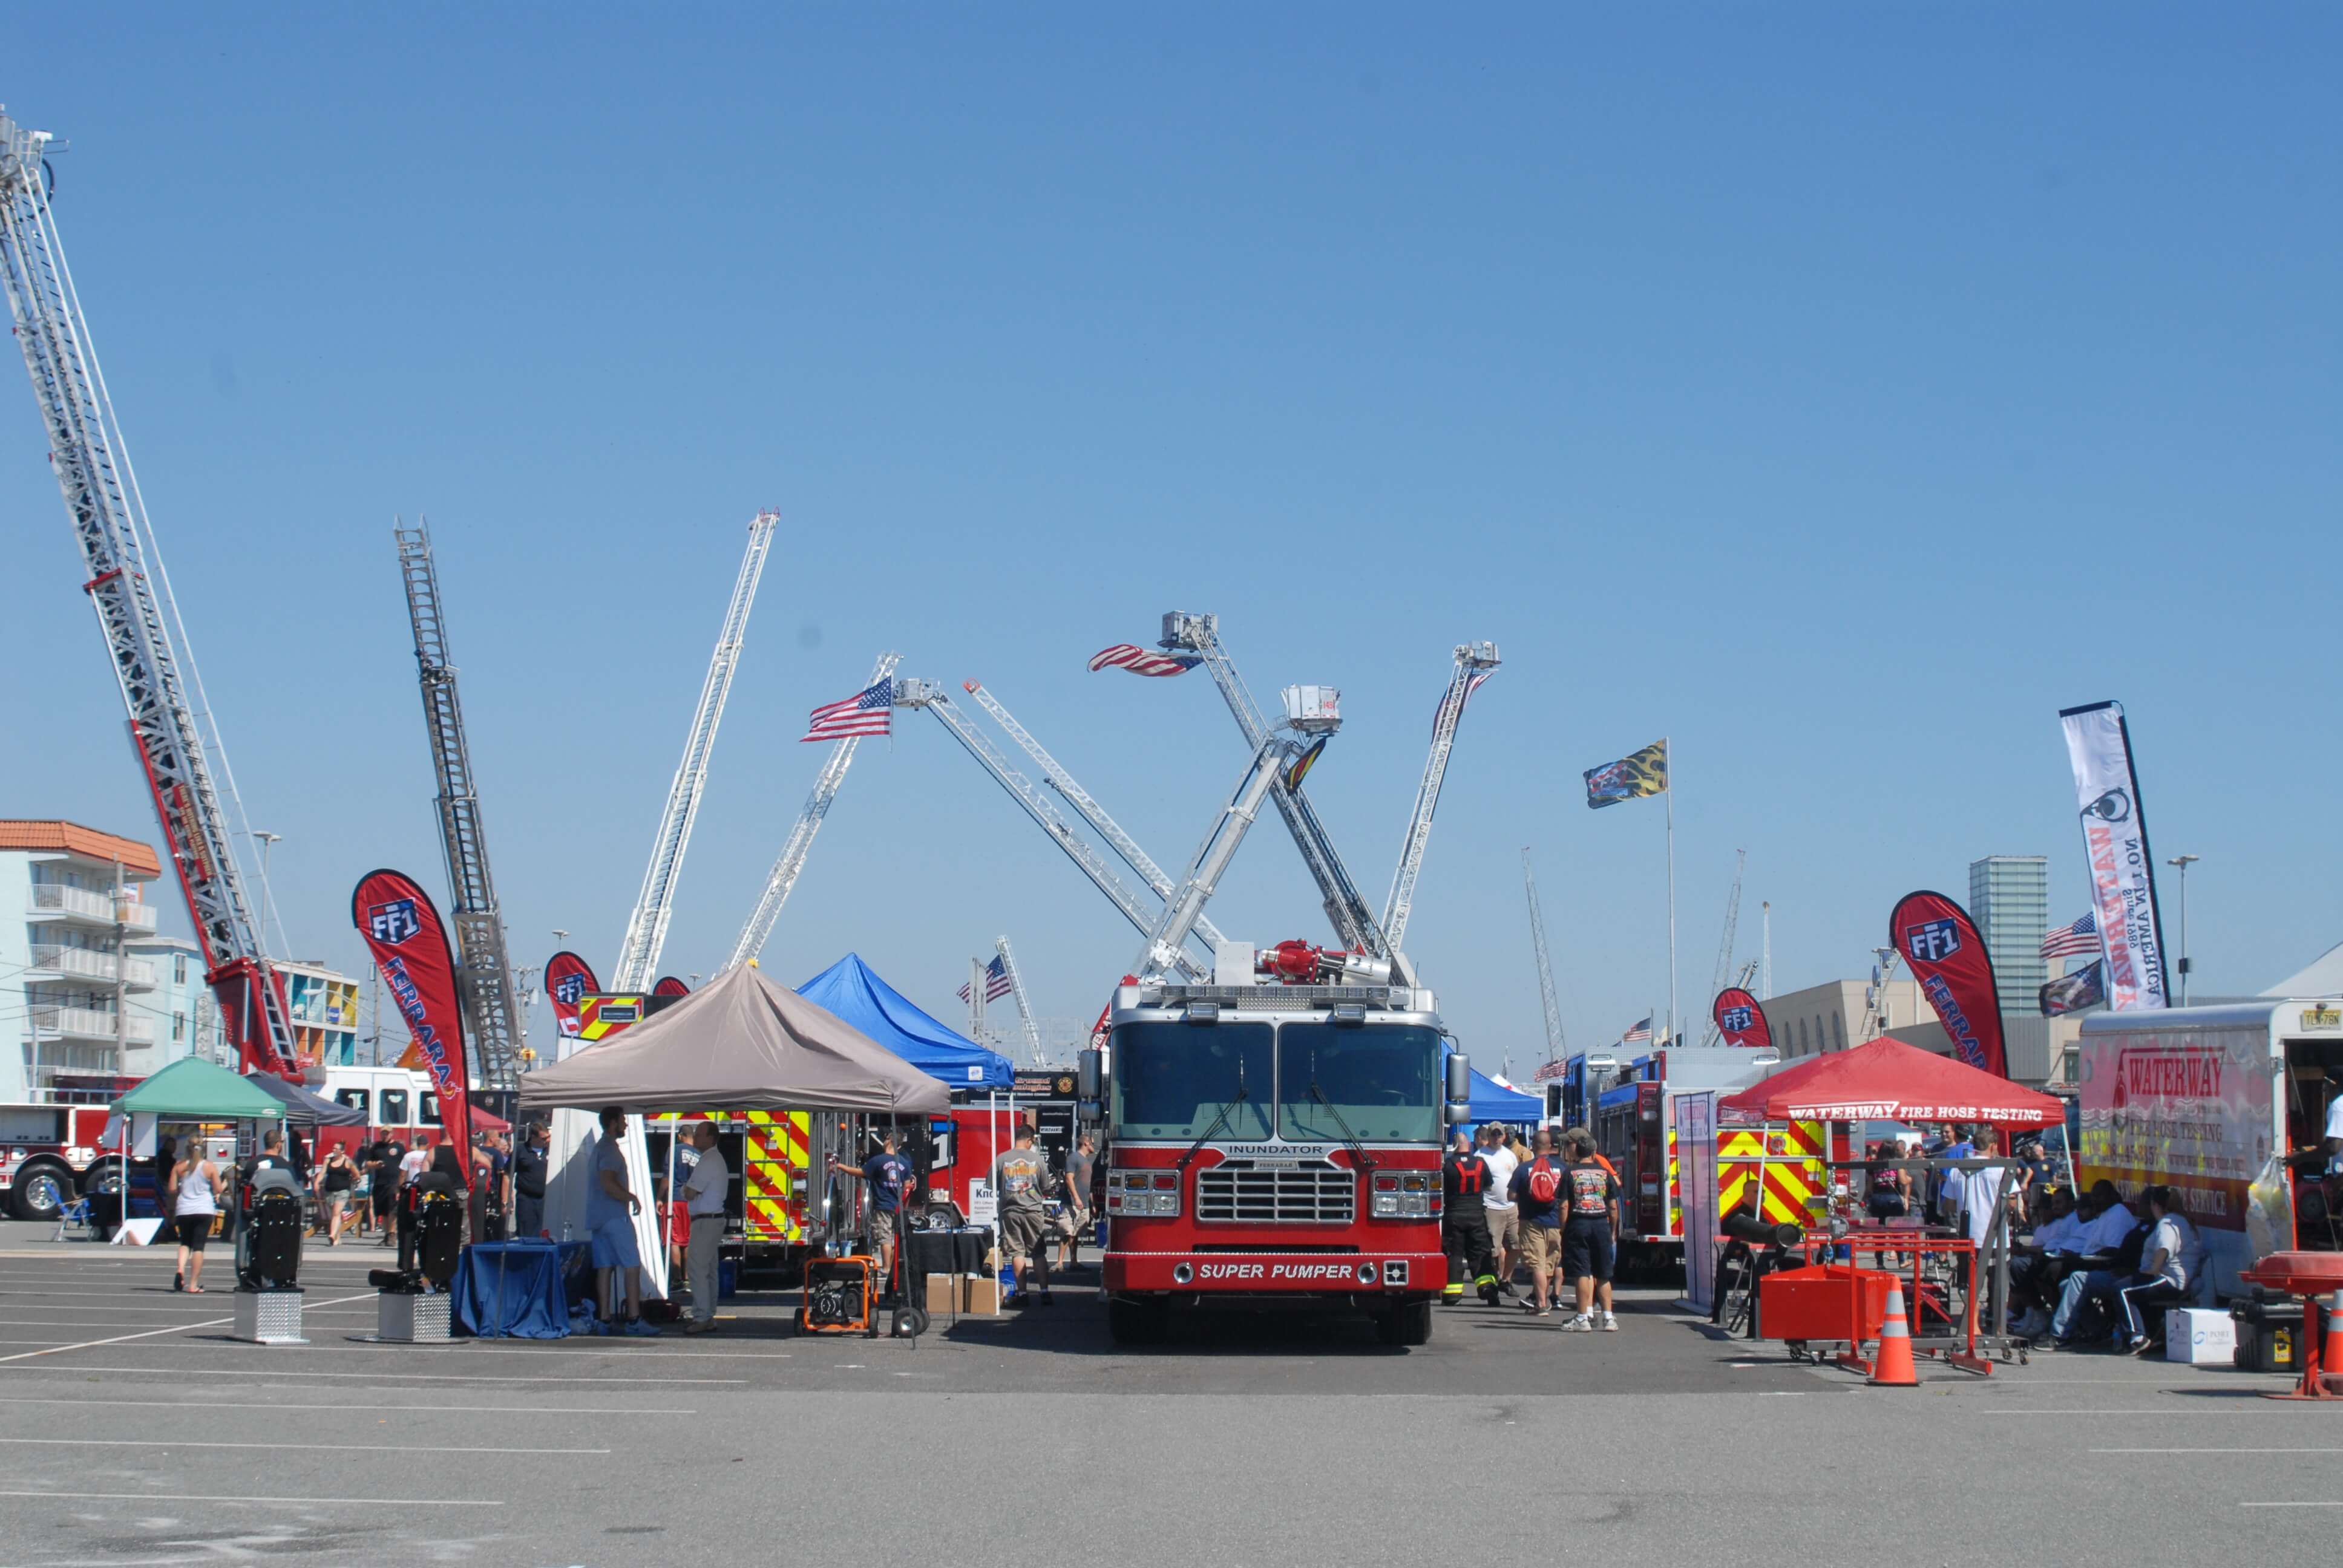 The New Jersey State Fireman's Convention is scheduled for Sept. 13-15 in the Wildwoods.